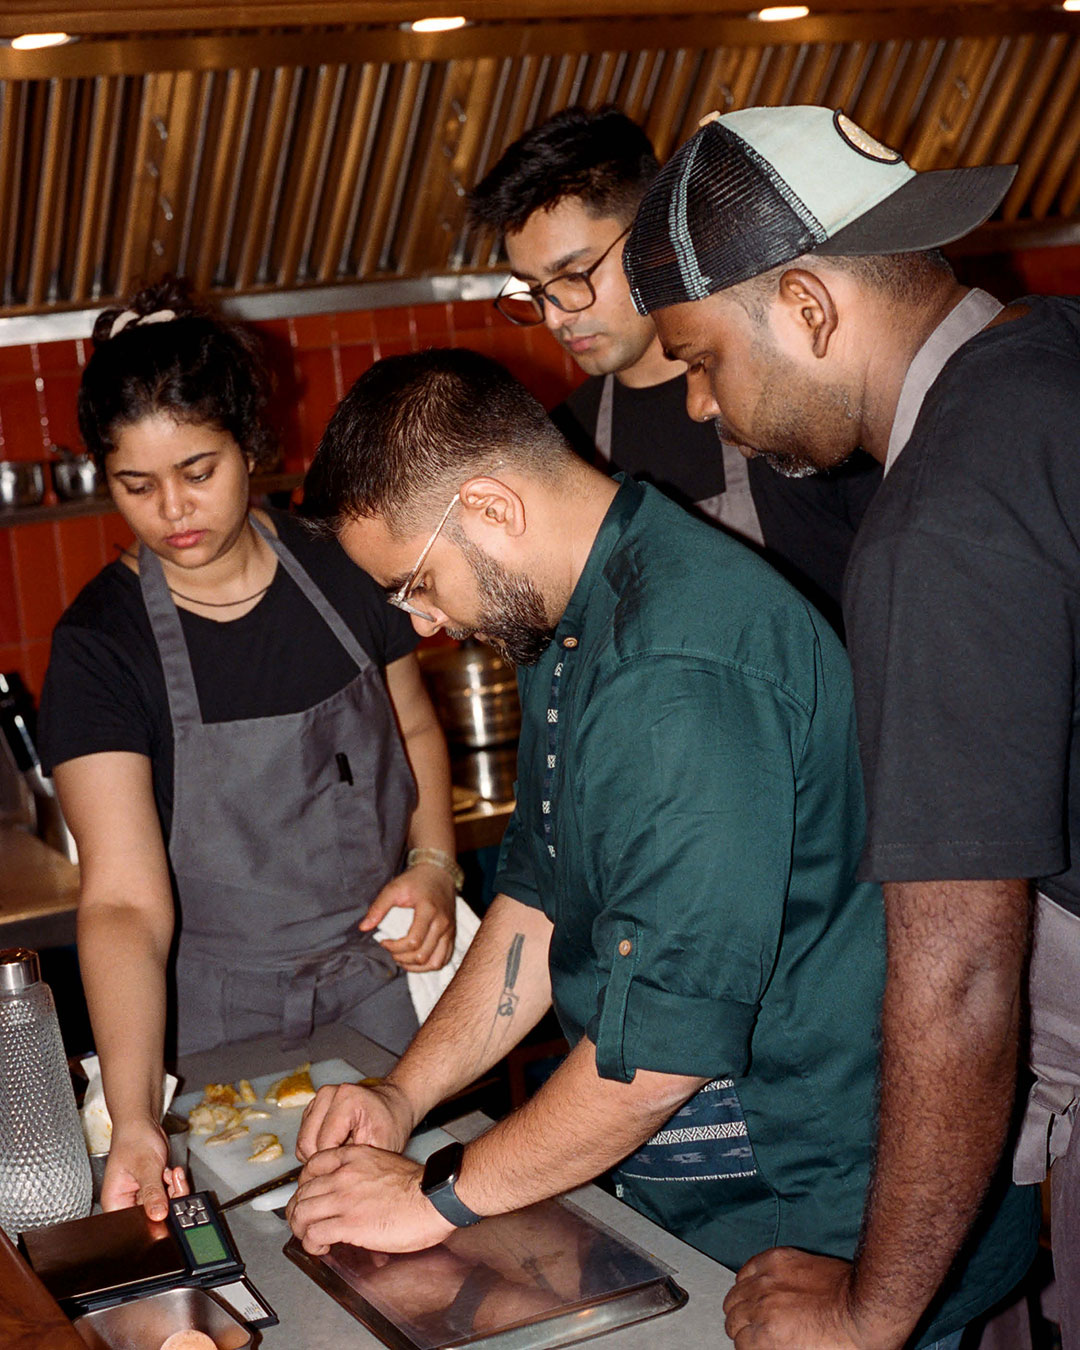 Shahzad working with his team at his new chef’s counter space Papa’s.